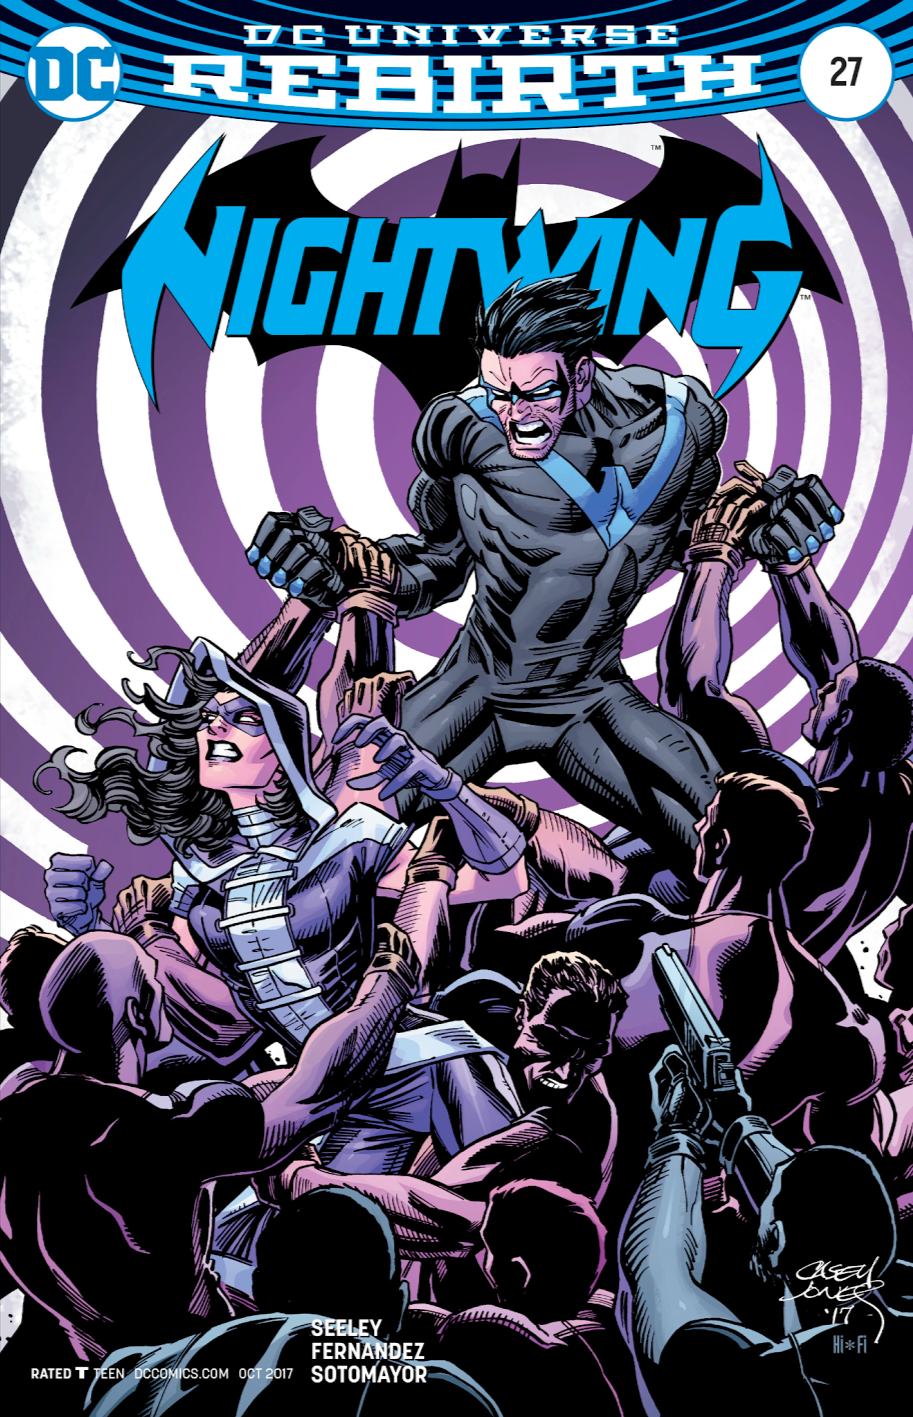 Nightwing 27 review